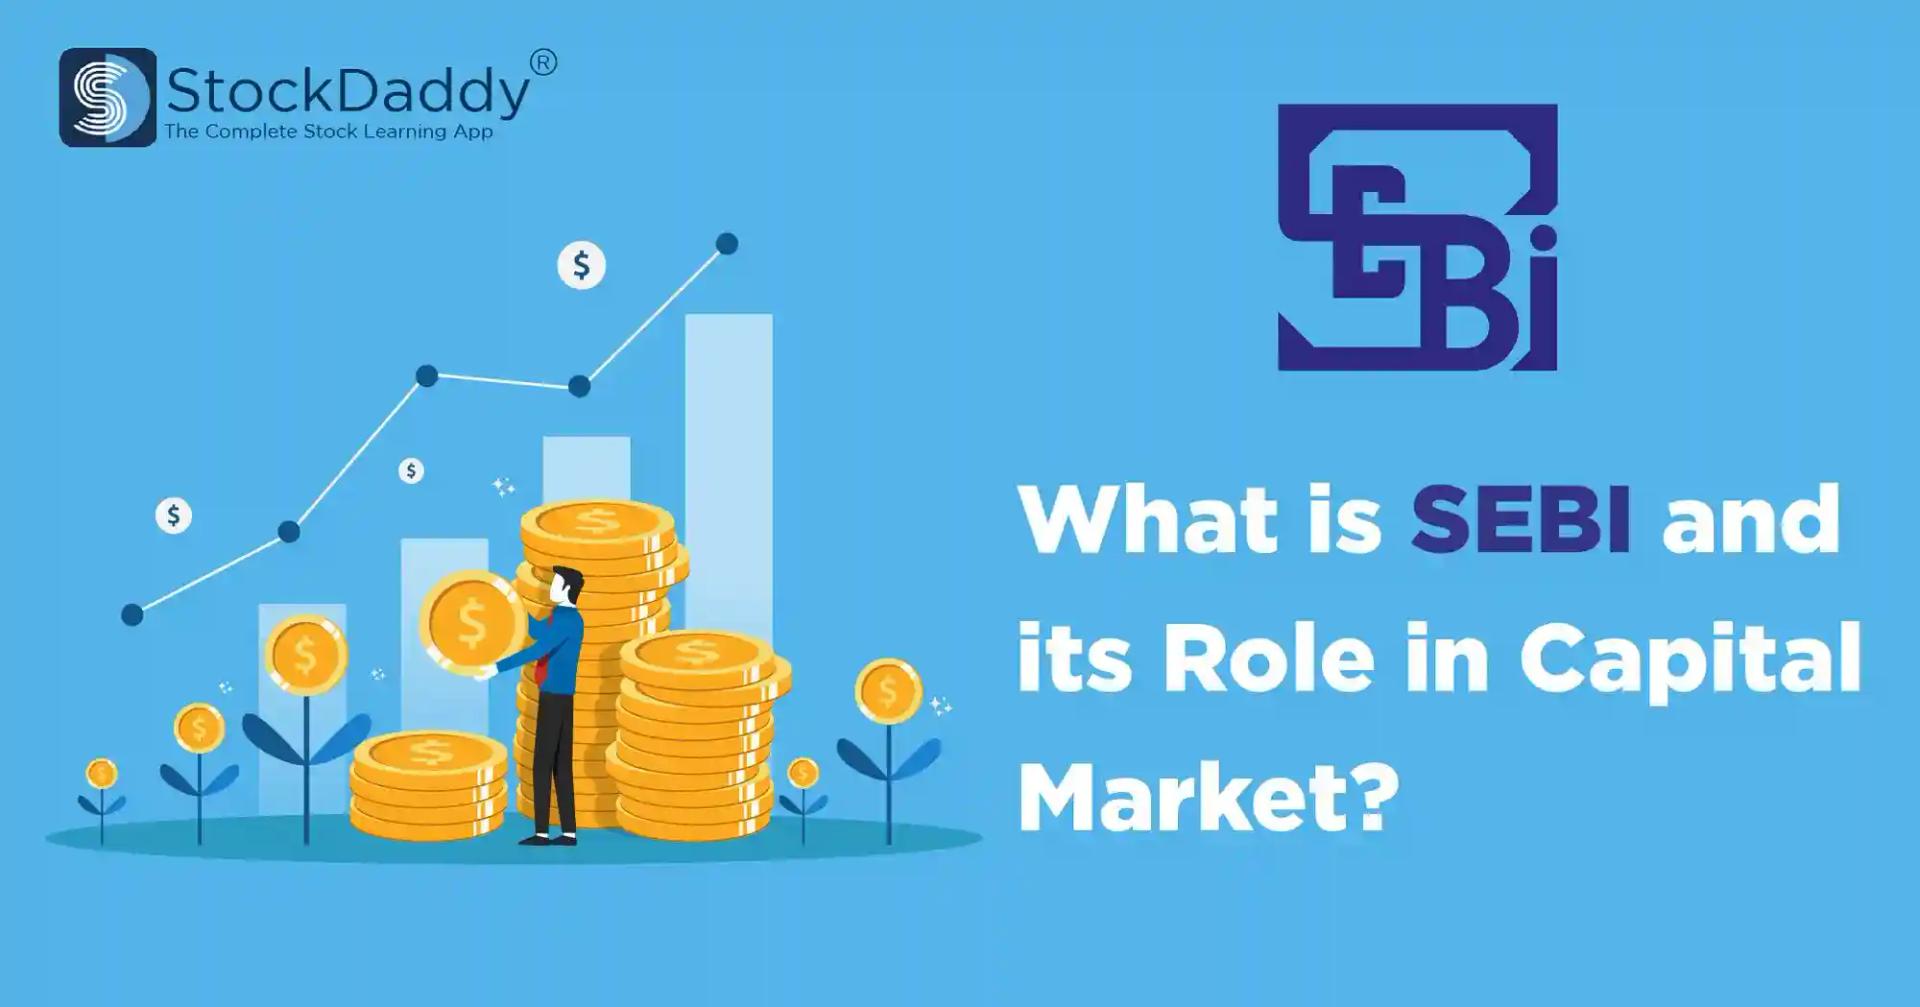 What is SEBI and its Role in Capital Market?